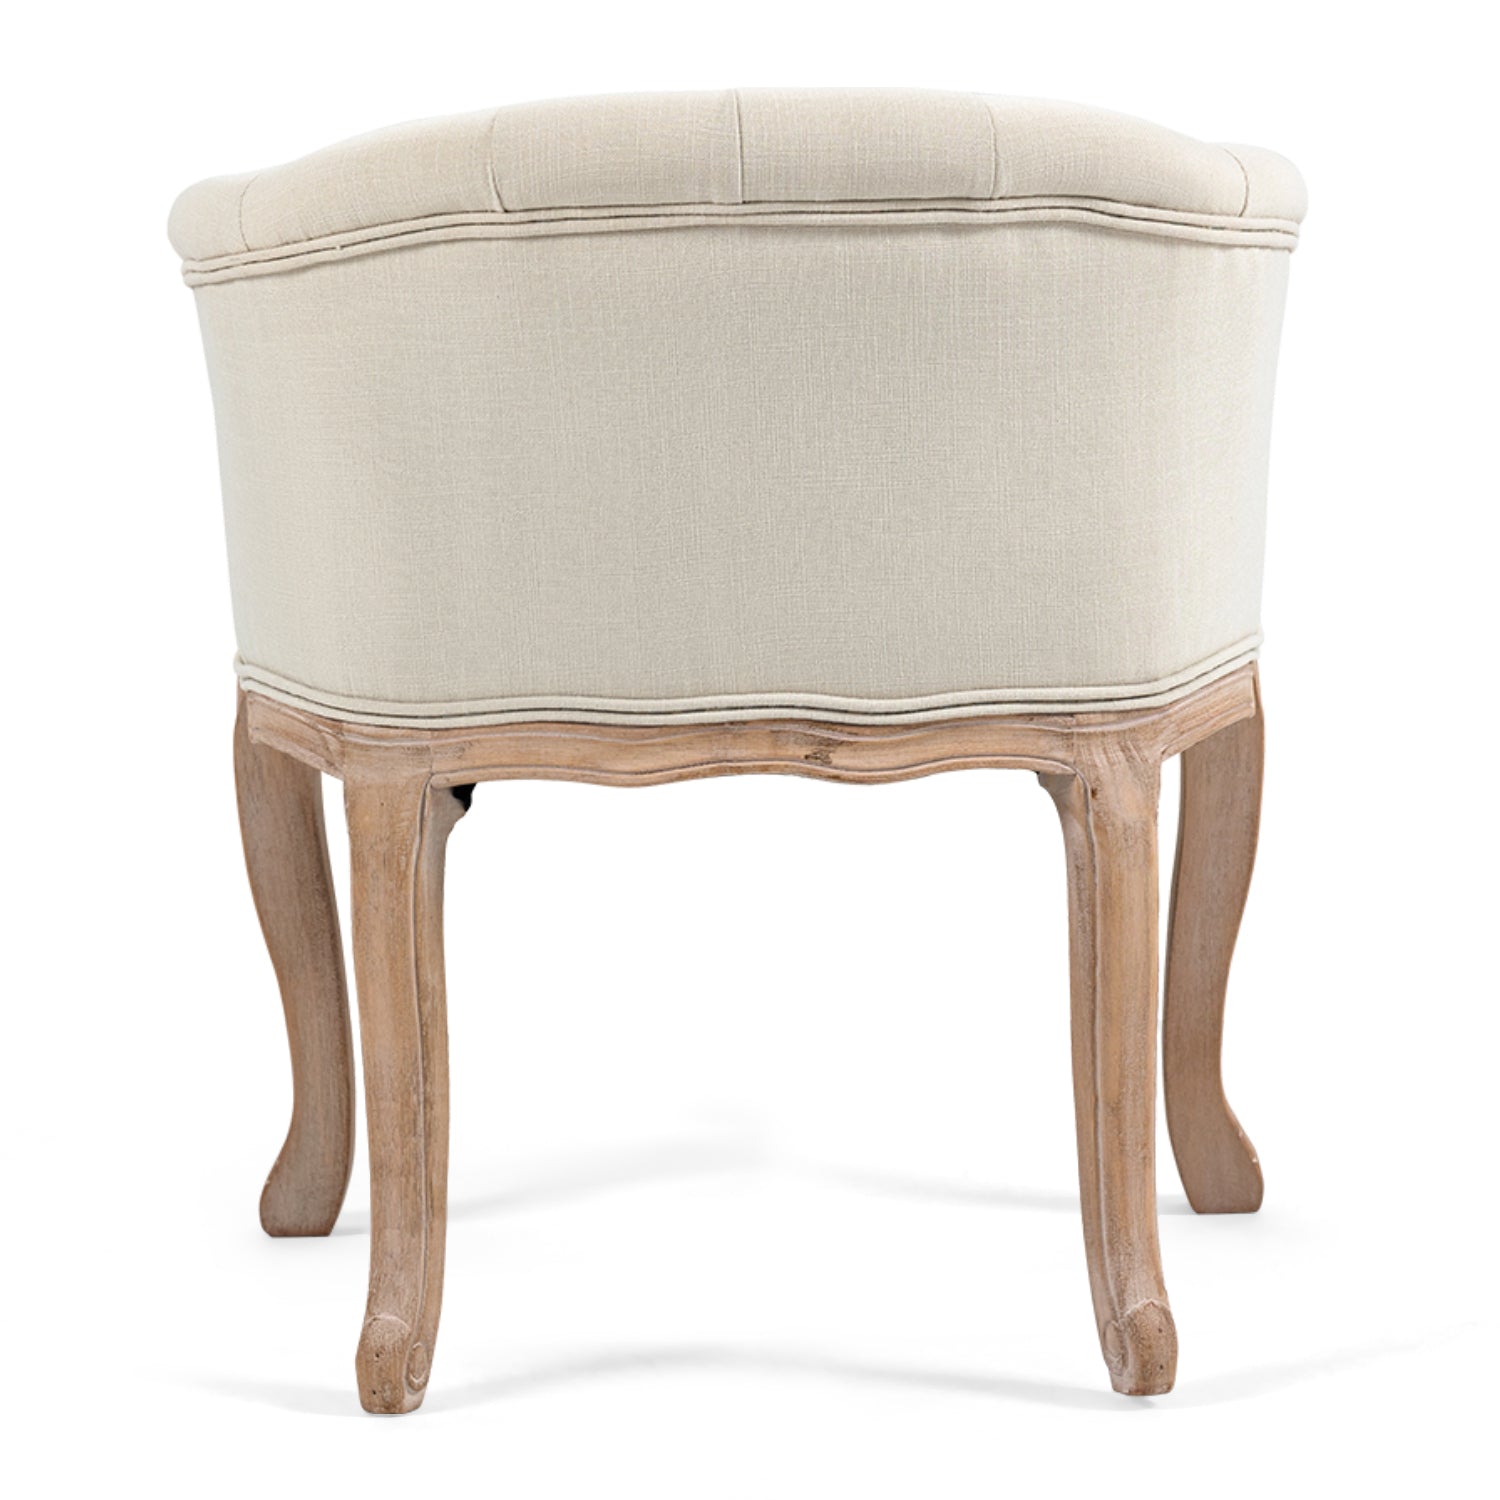 Accent Chair for Living Room Bedroom, French